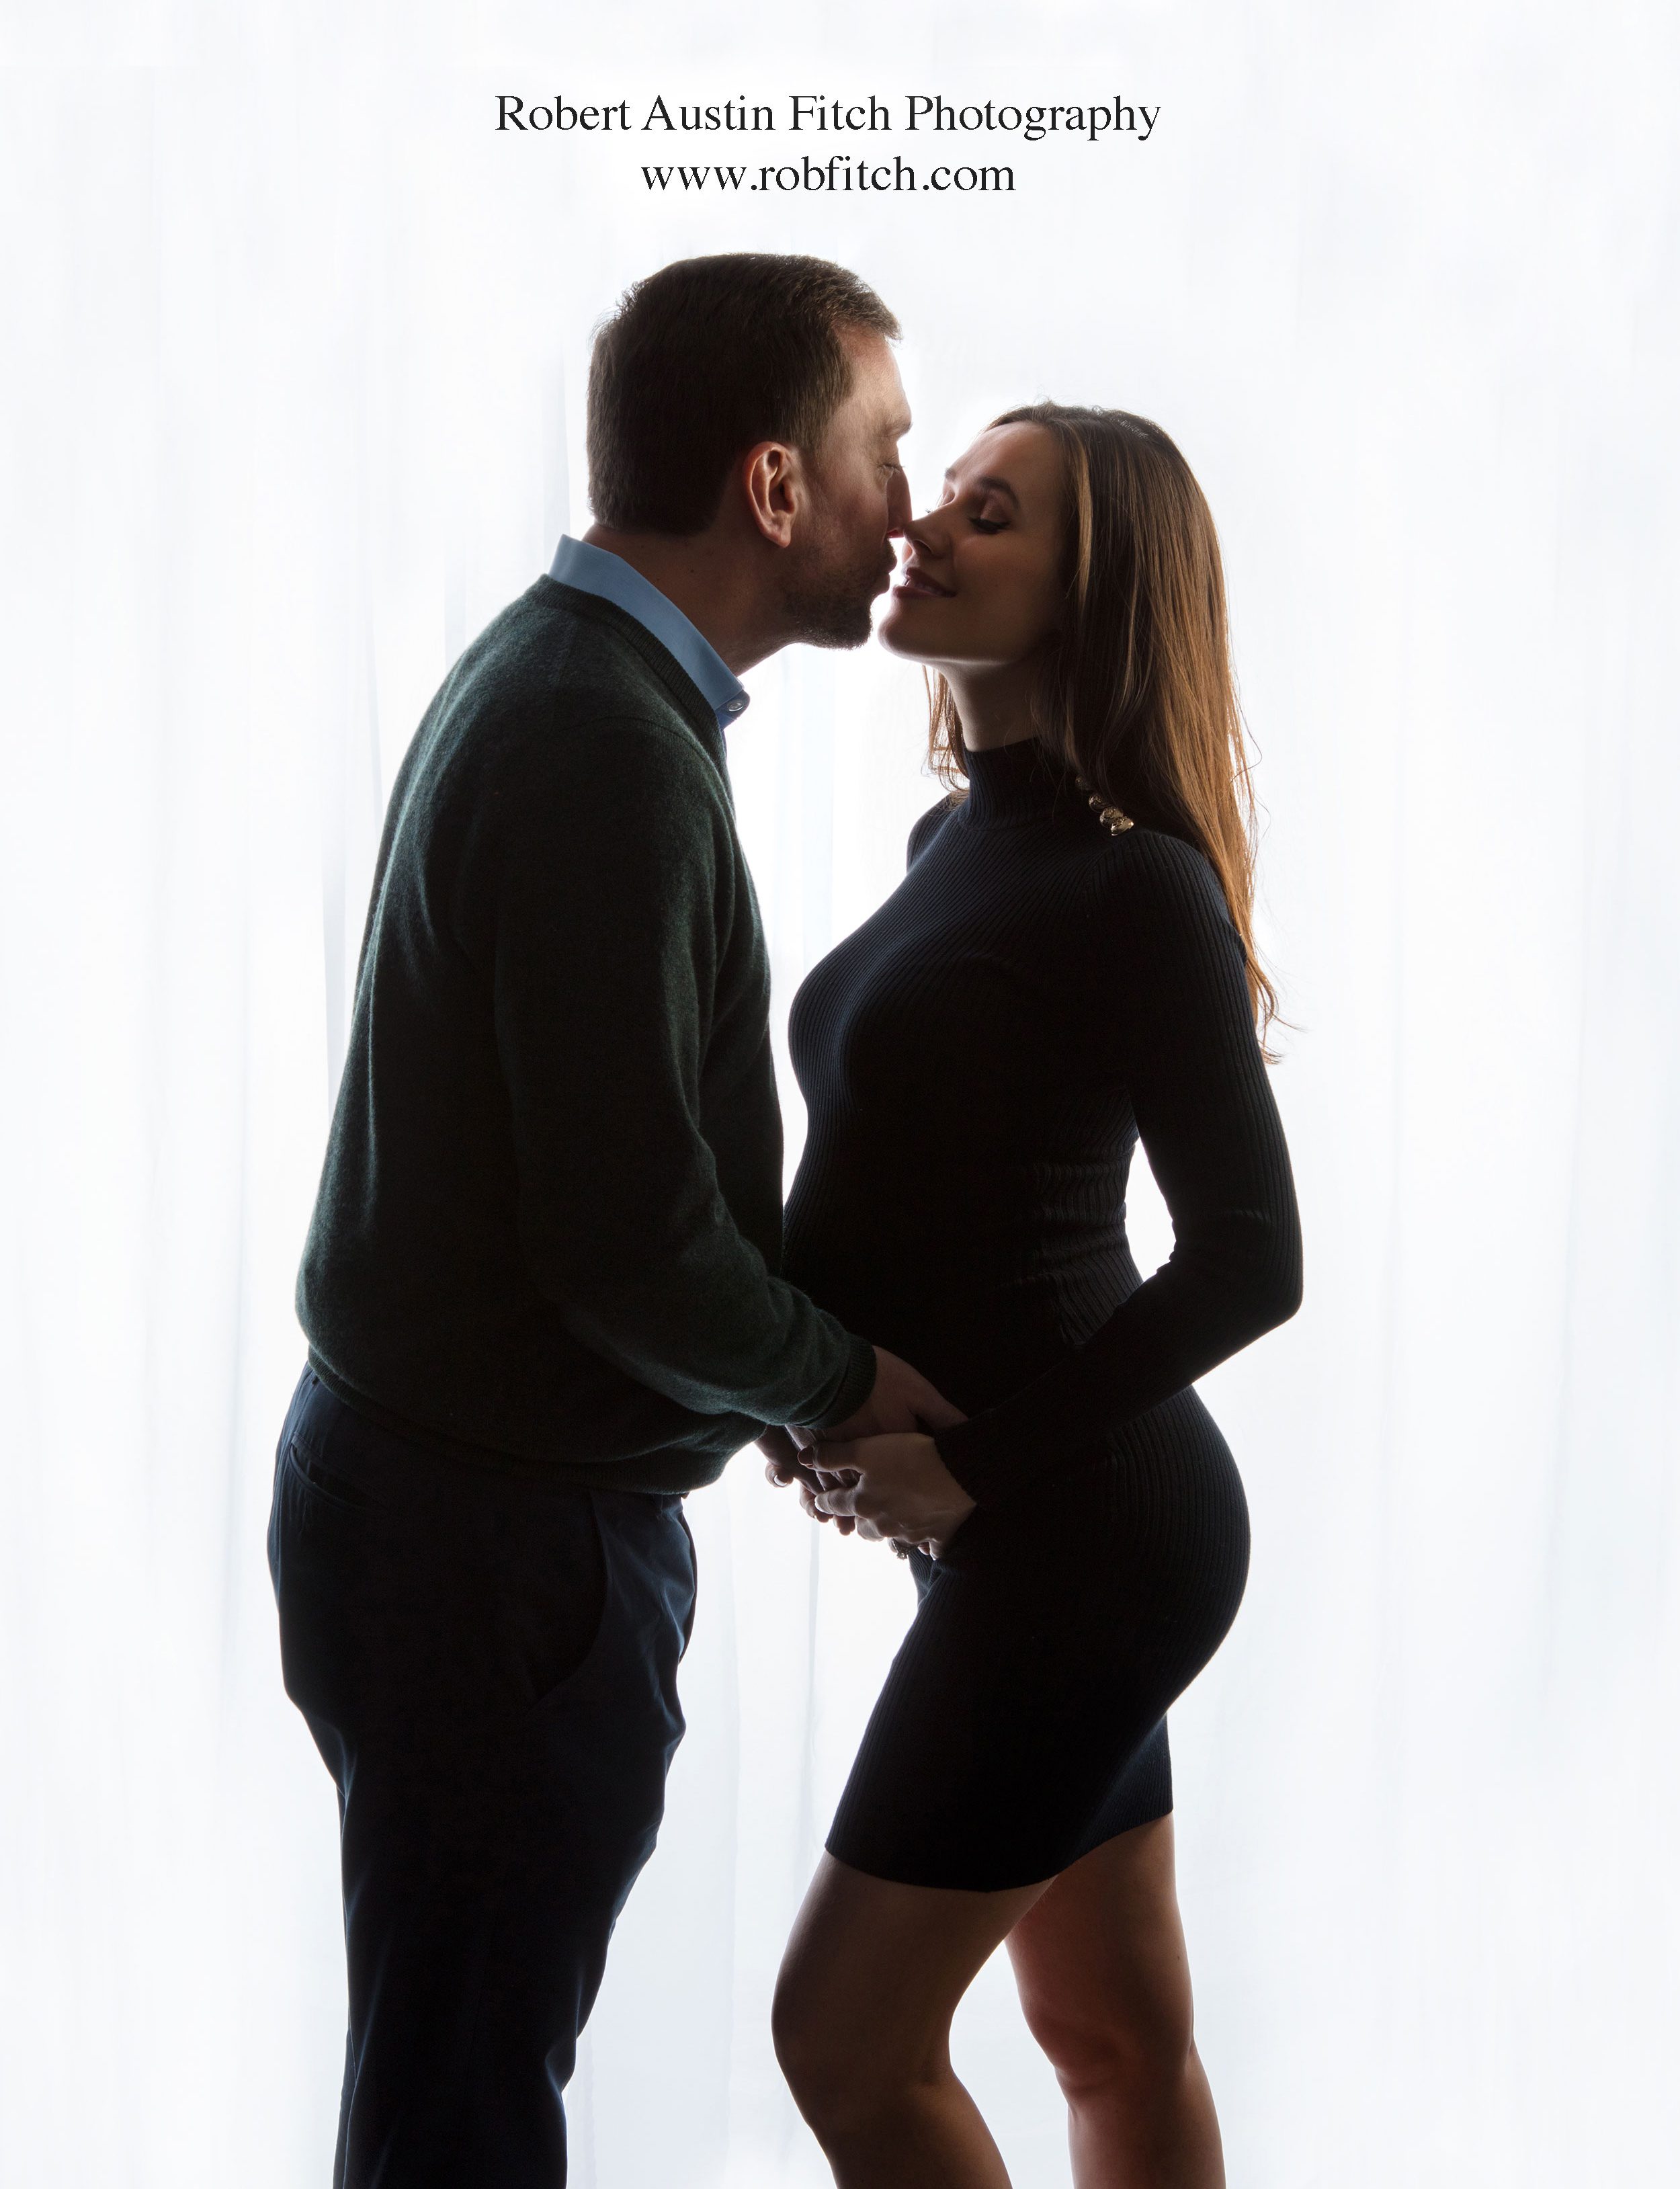 Artistic silhouette maternity photos by Robert Austin Fitch